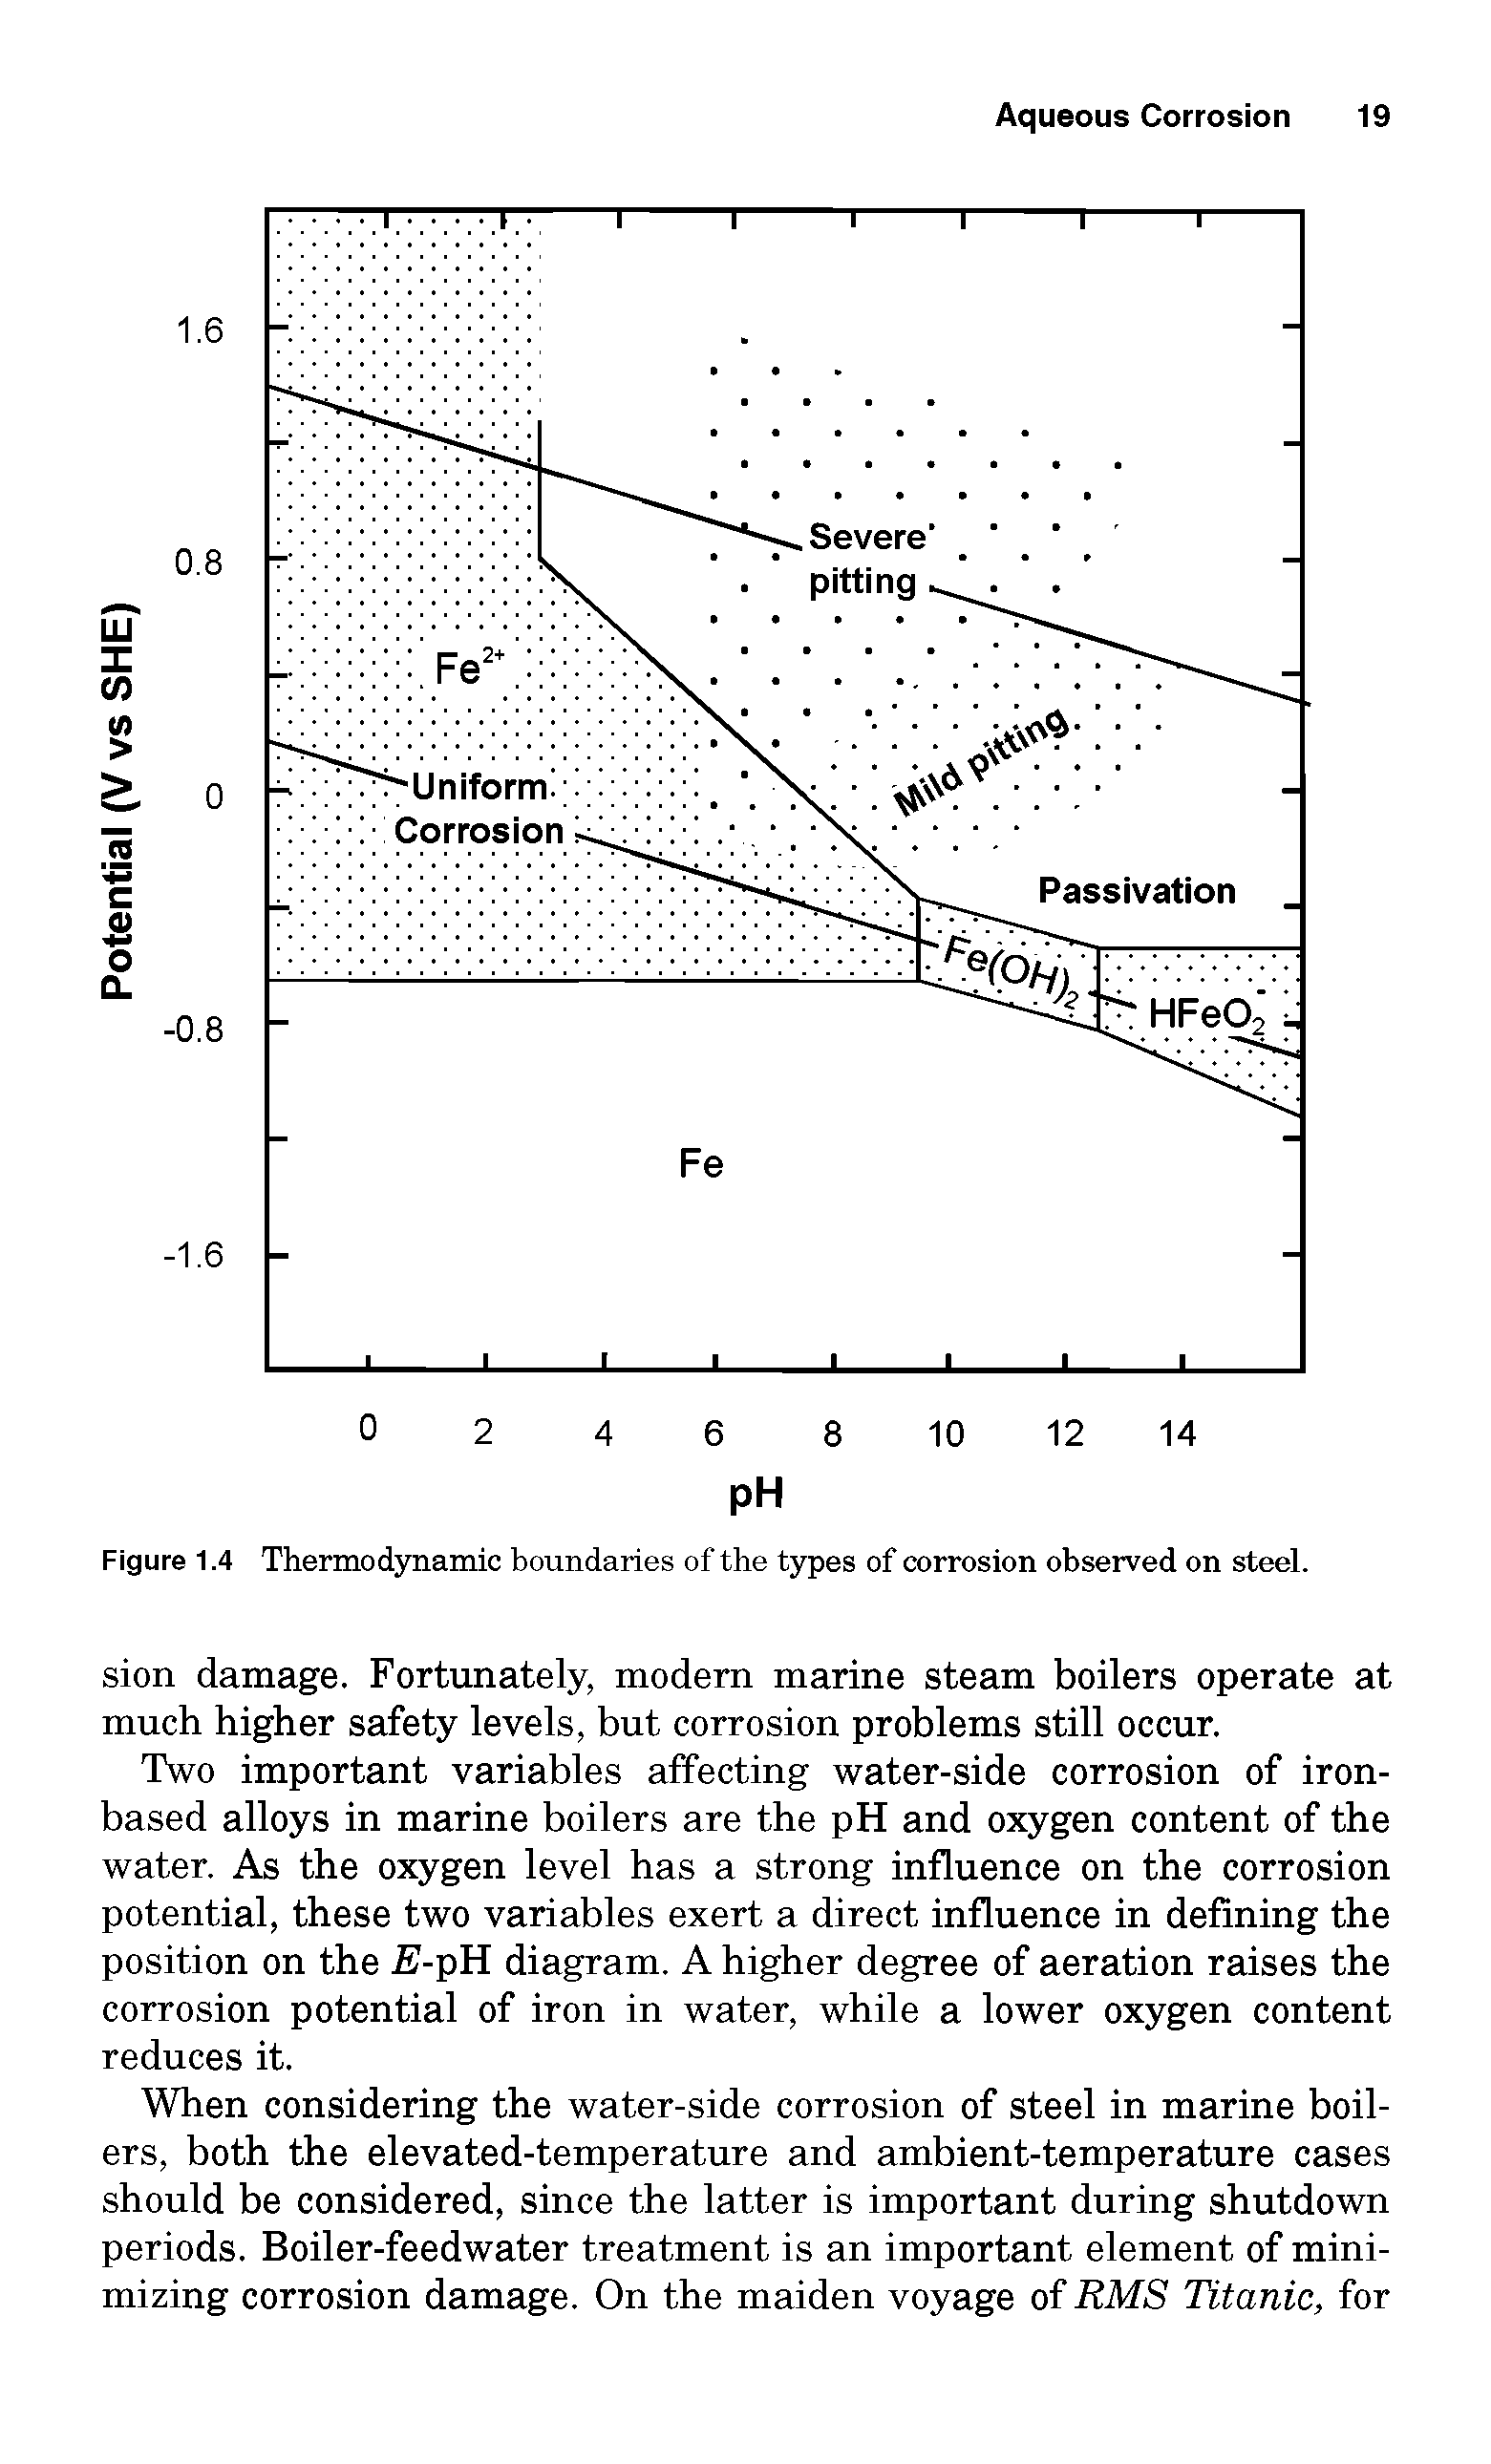 Figure 1.4 Thermodynamic boundaries of the types of corrosion observed on steel.